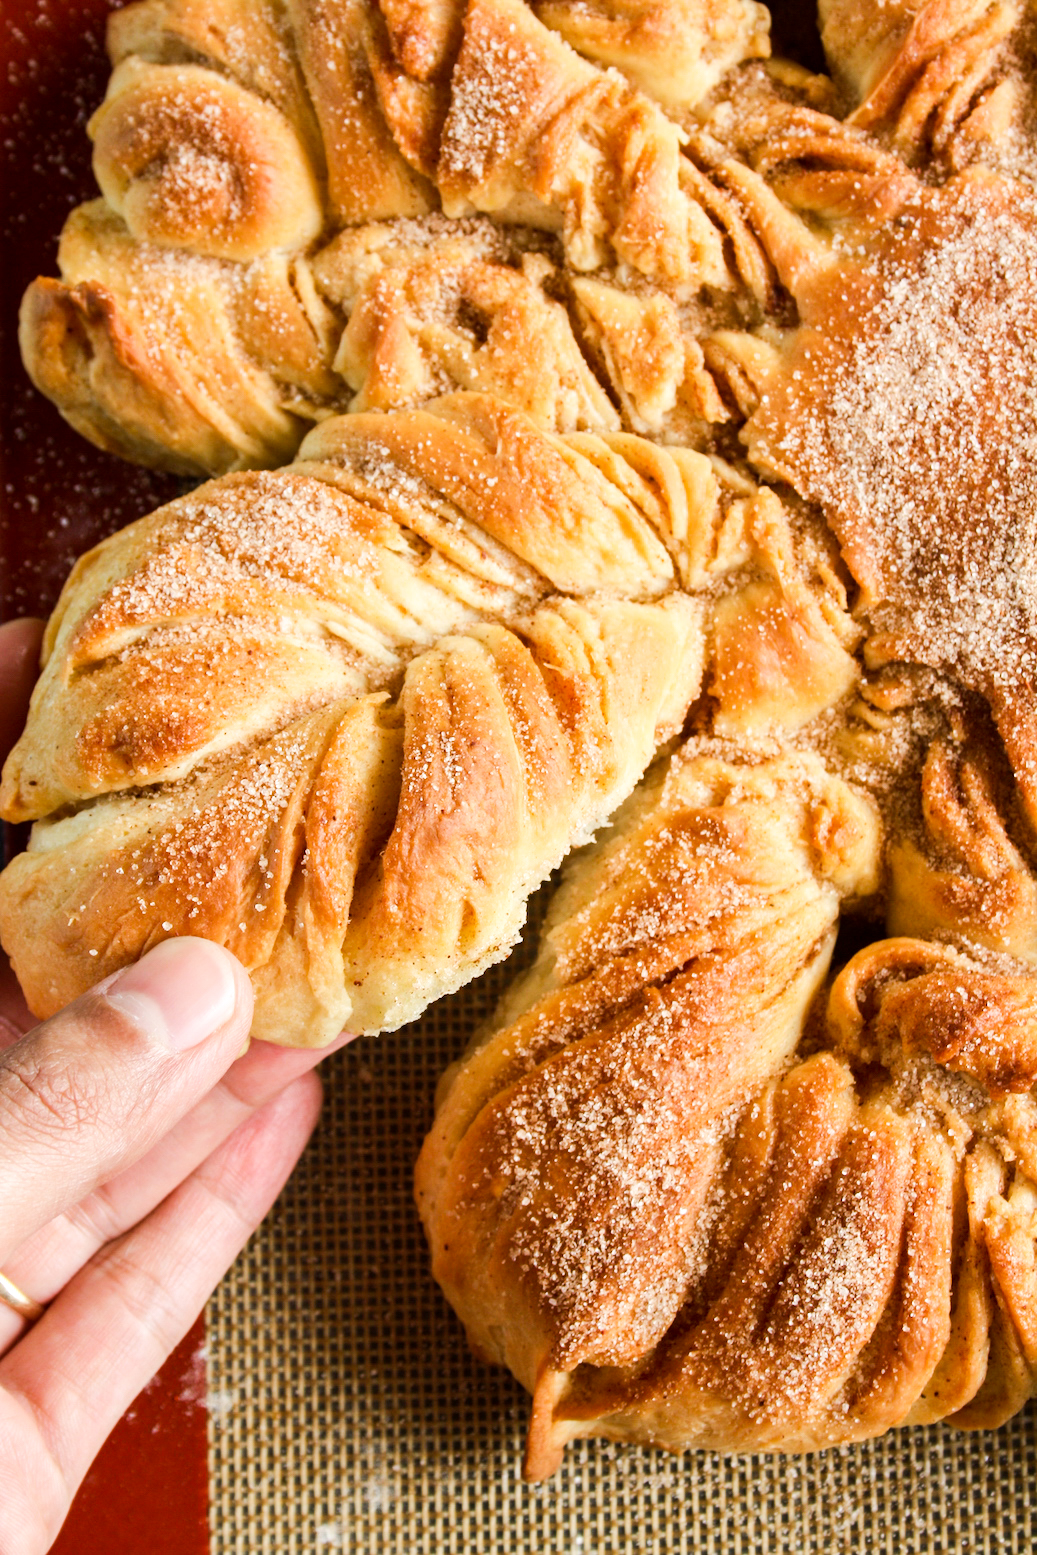 Soft and fluffy star shaped bread with a cinnamon sugar filling